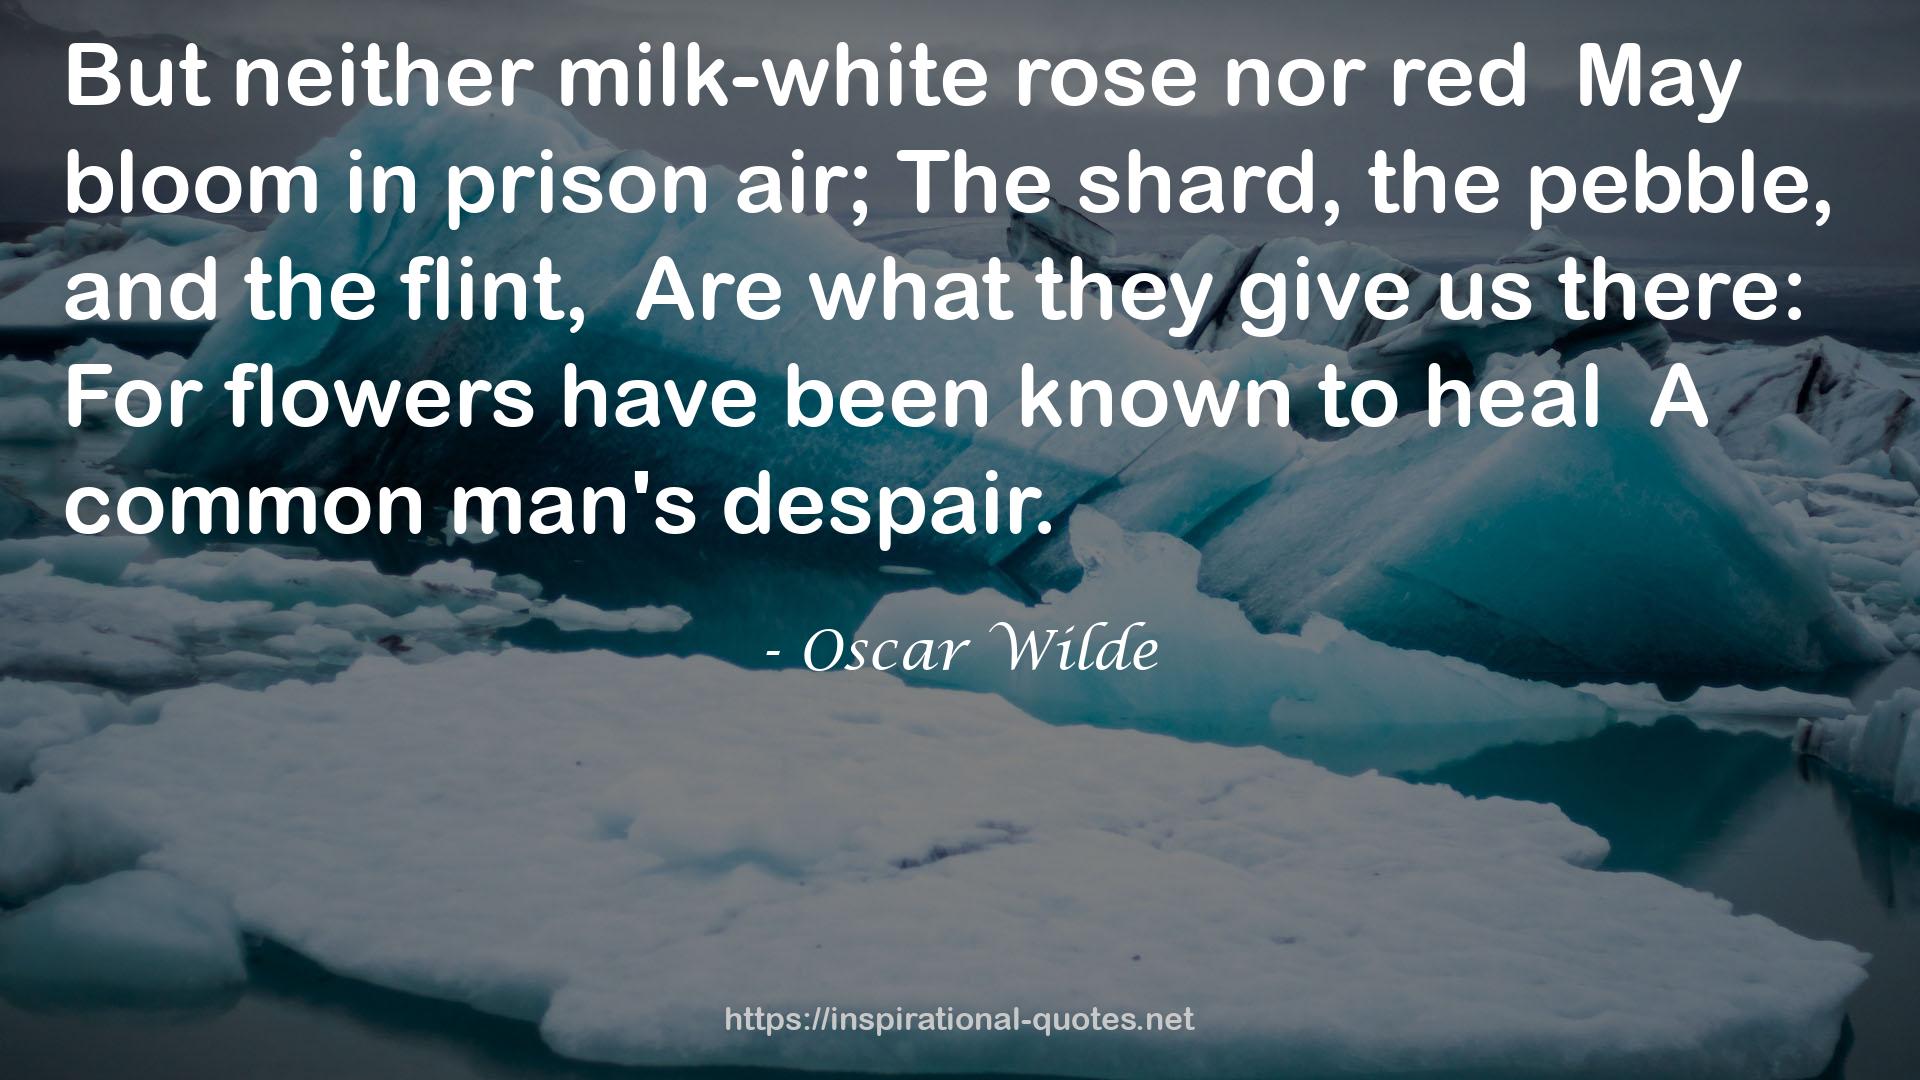 neither milk-white rose  QUOTES